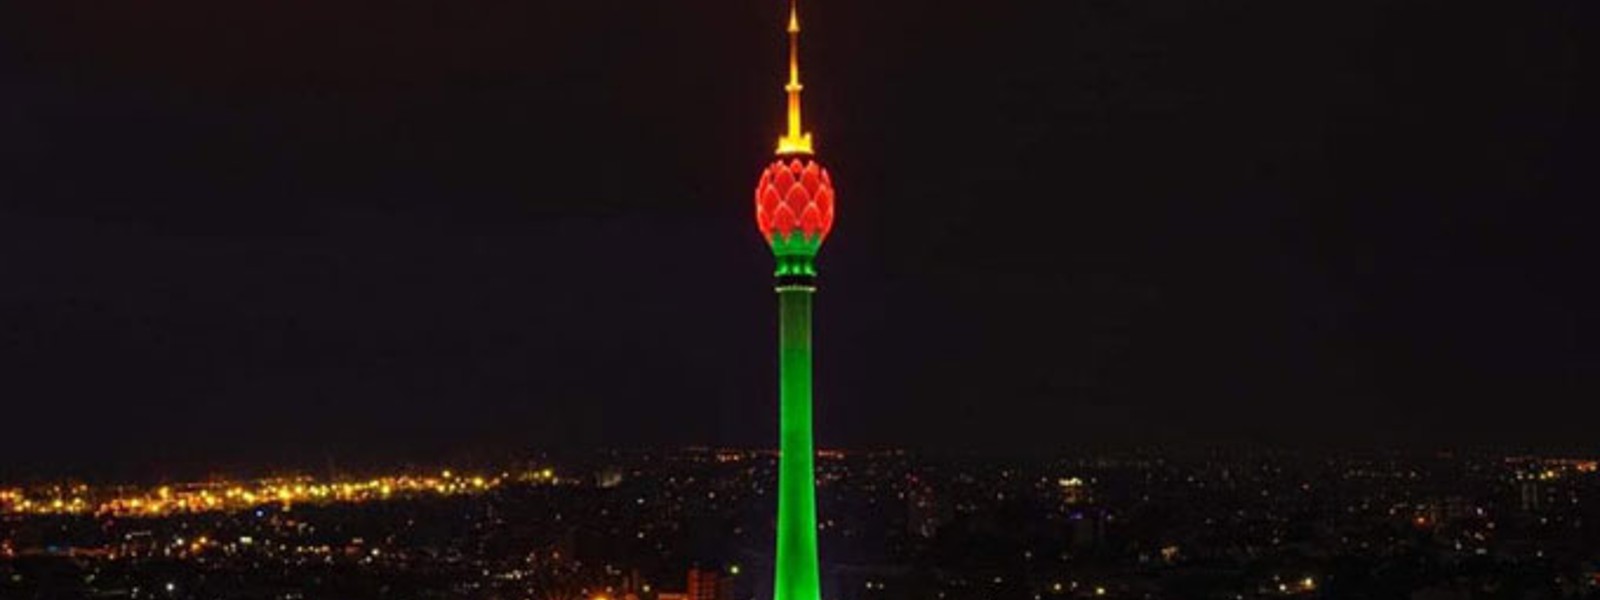 Lotus Tower revenue after three days at Rs. 7.5Mn